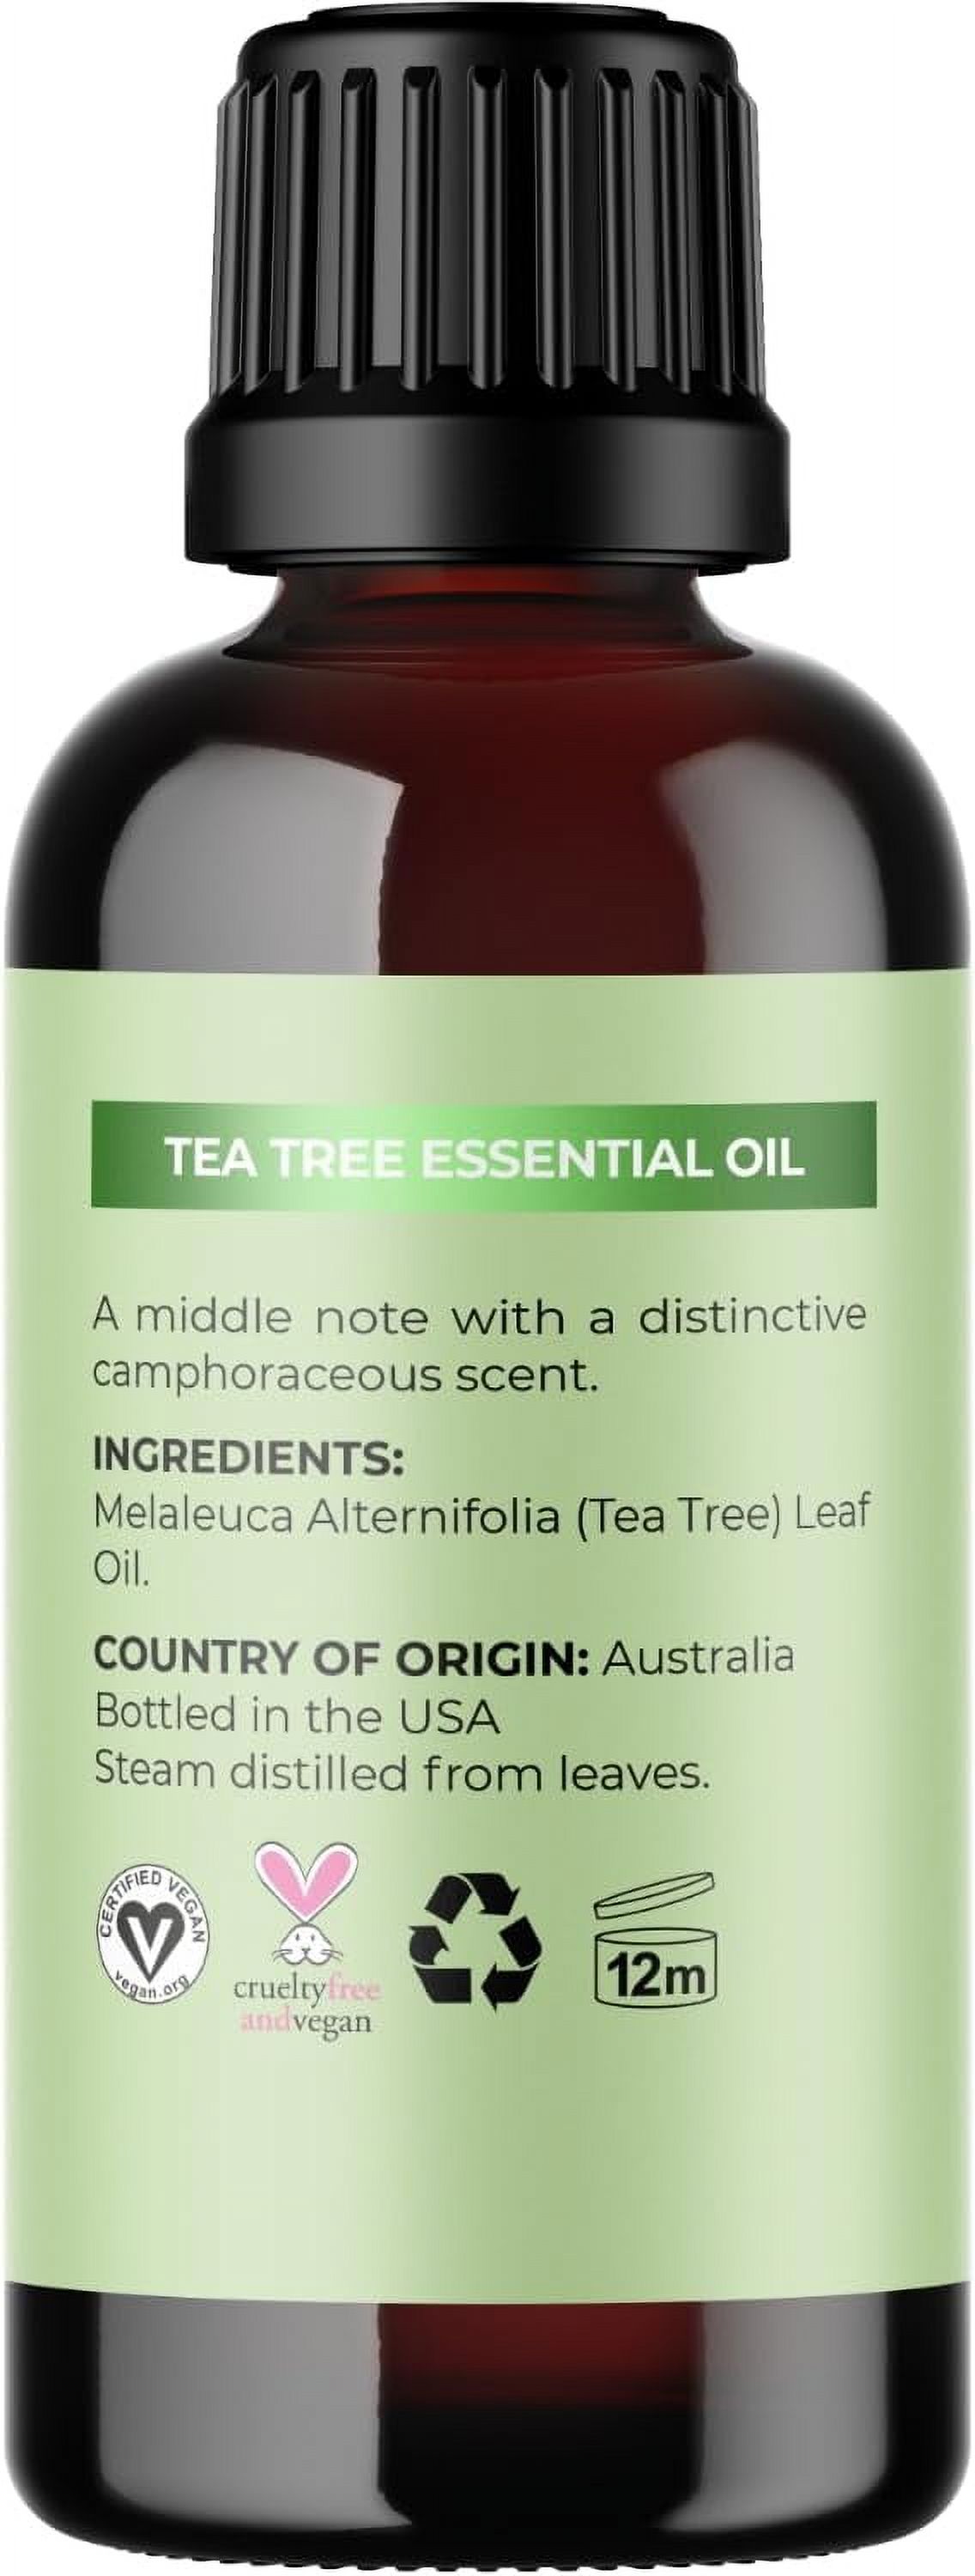 Undiluted Australian Tea Tree Essential Oil for Hair Skin and Nails - Pure Tea Tree Oil for Skin Cleanser Foot Soak and Dry Scalp Treatment, 1 fl oz - image 2 of 6